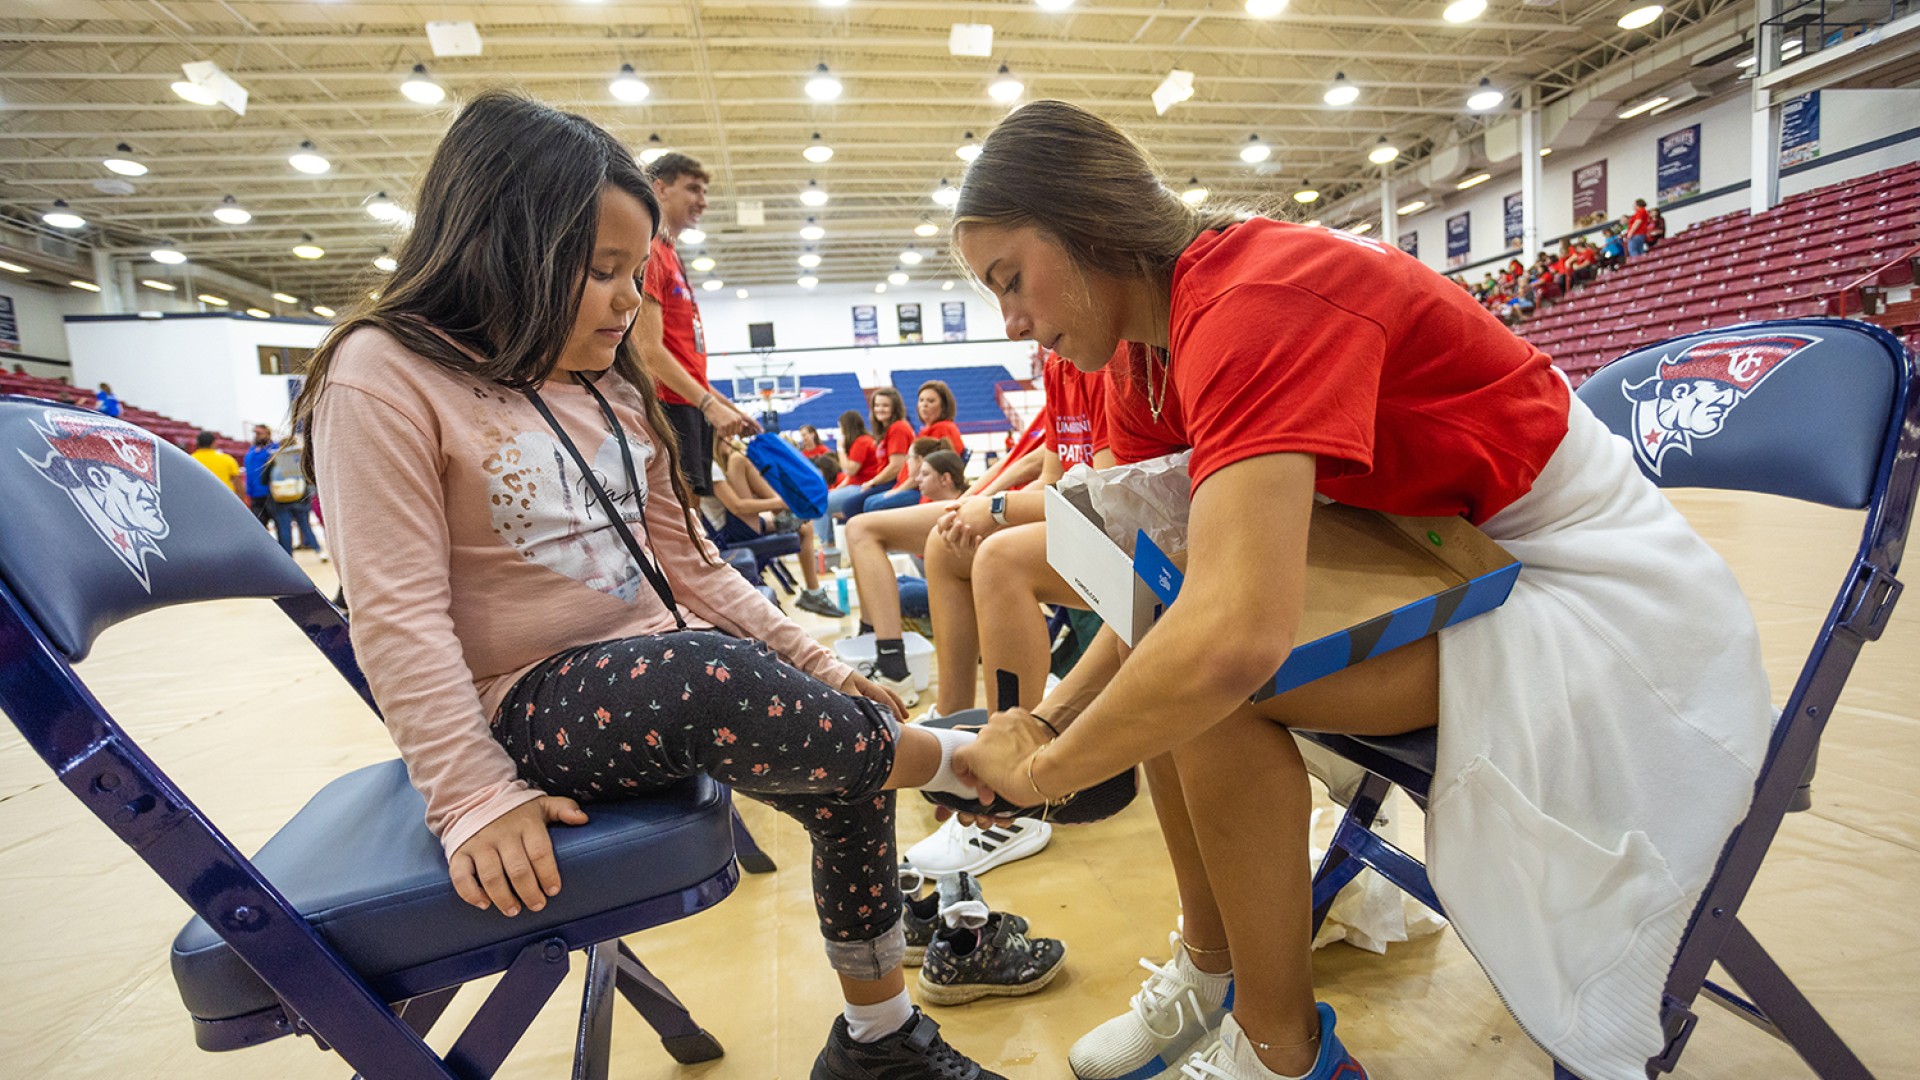 A Cumberlands student helps a local child try on new shoes